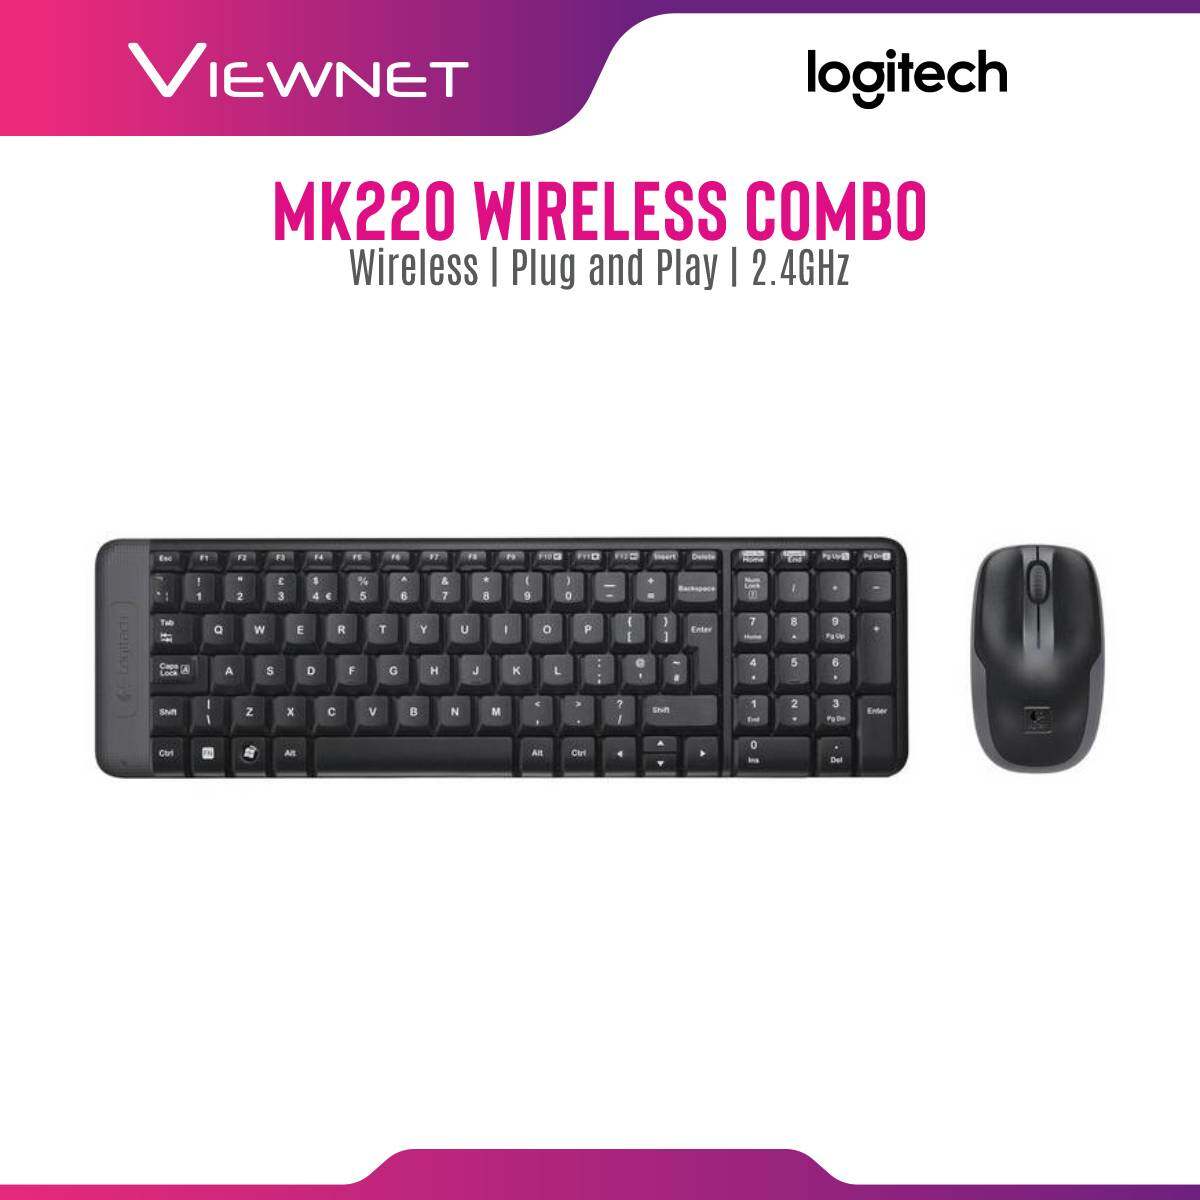 Logitech MK220 Wireless Combo with 2.4GHz Wireless Connection, Minimalist Design, Up To 10M Range, Plug and Play